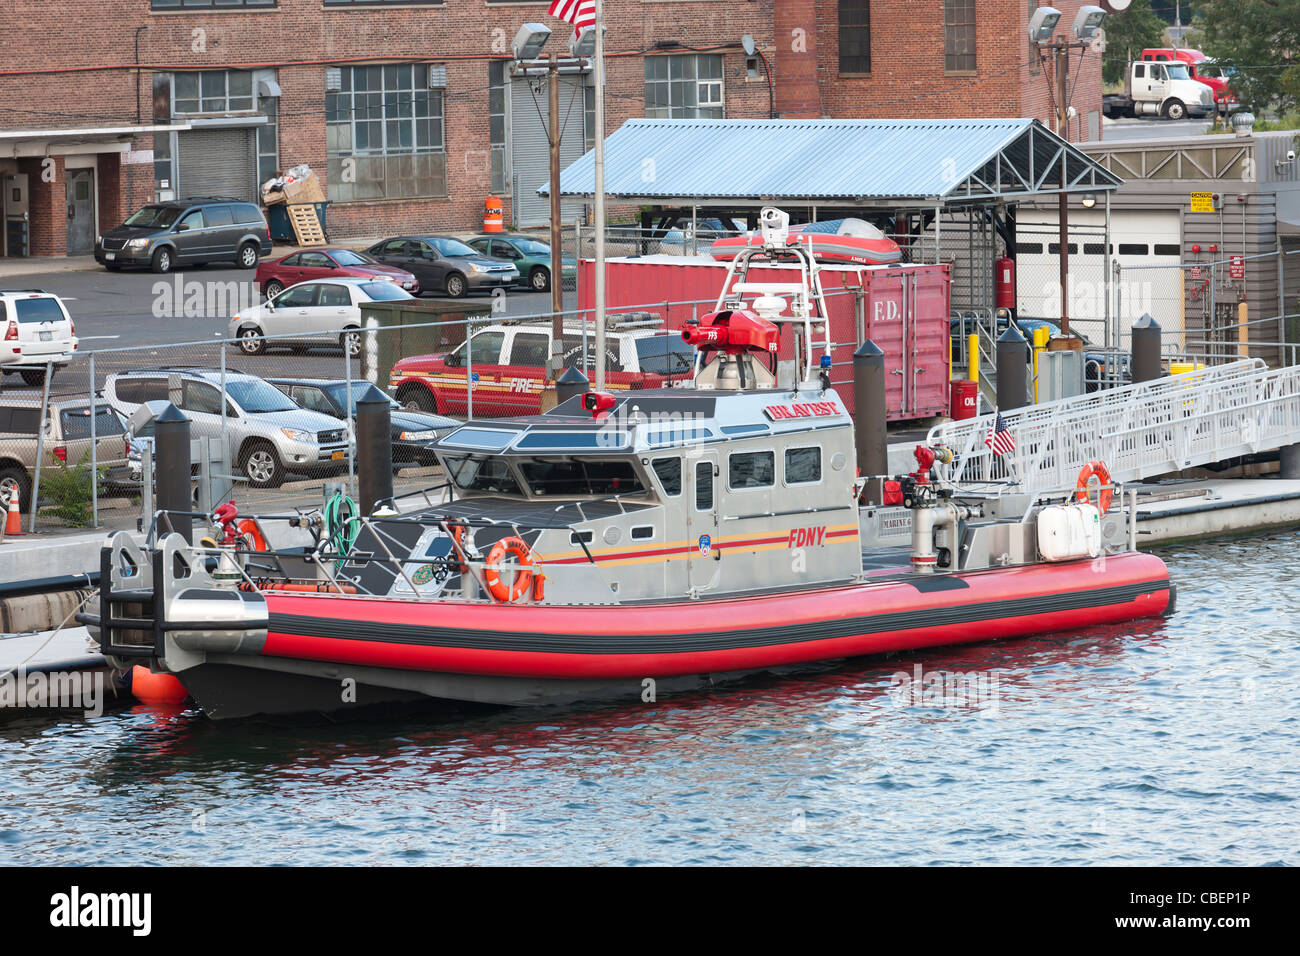 FDNY fire boat Bravest docked in the Brooklyn Navy Yard in New York City. Stock Photo